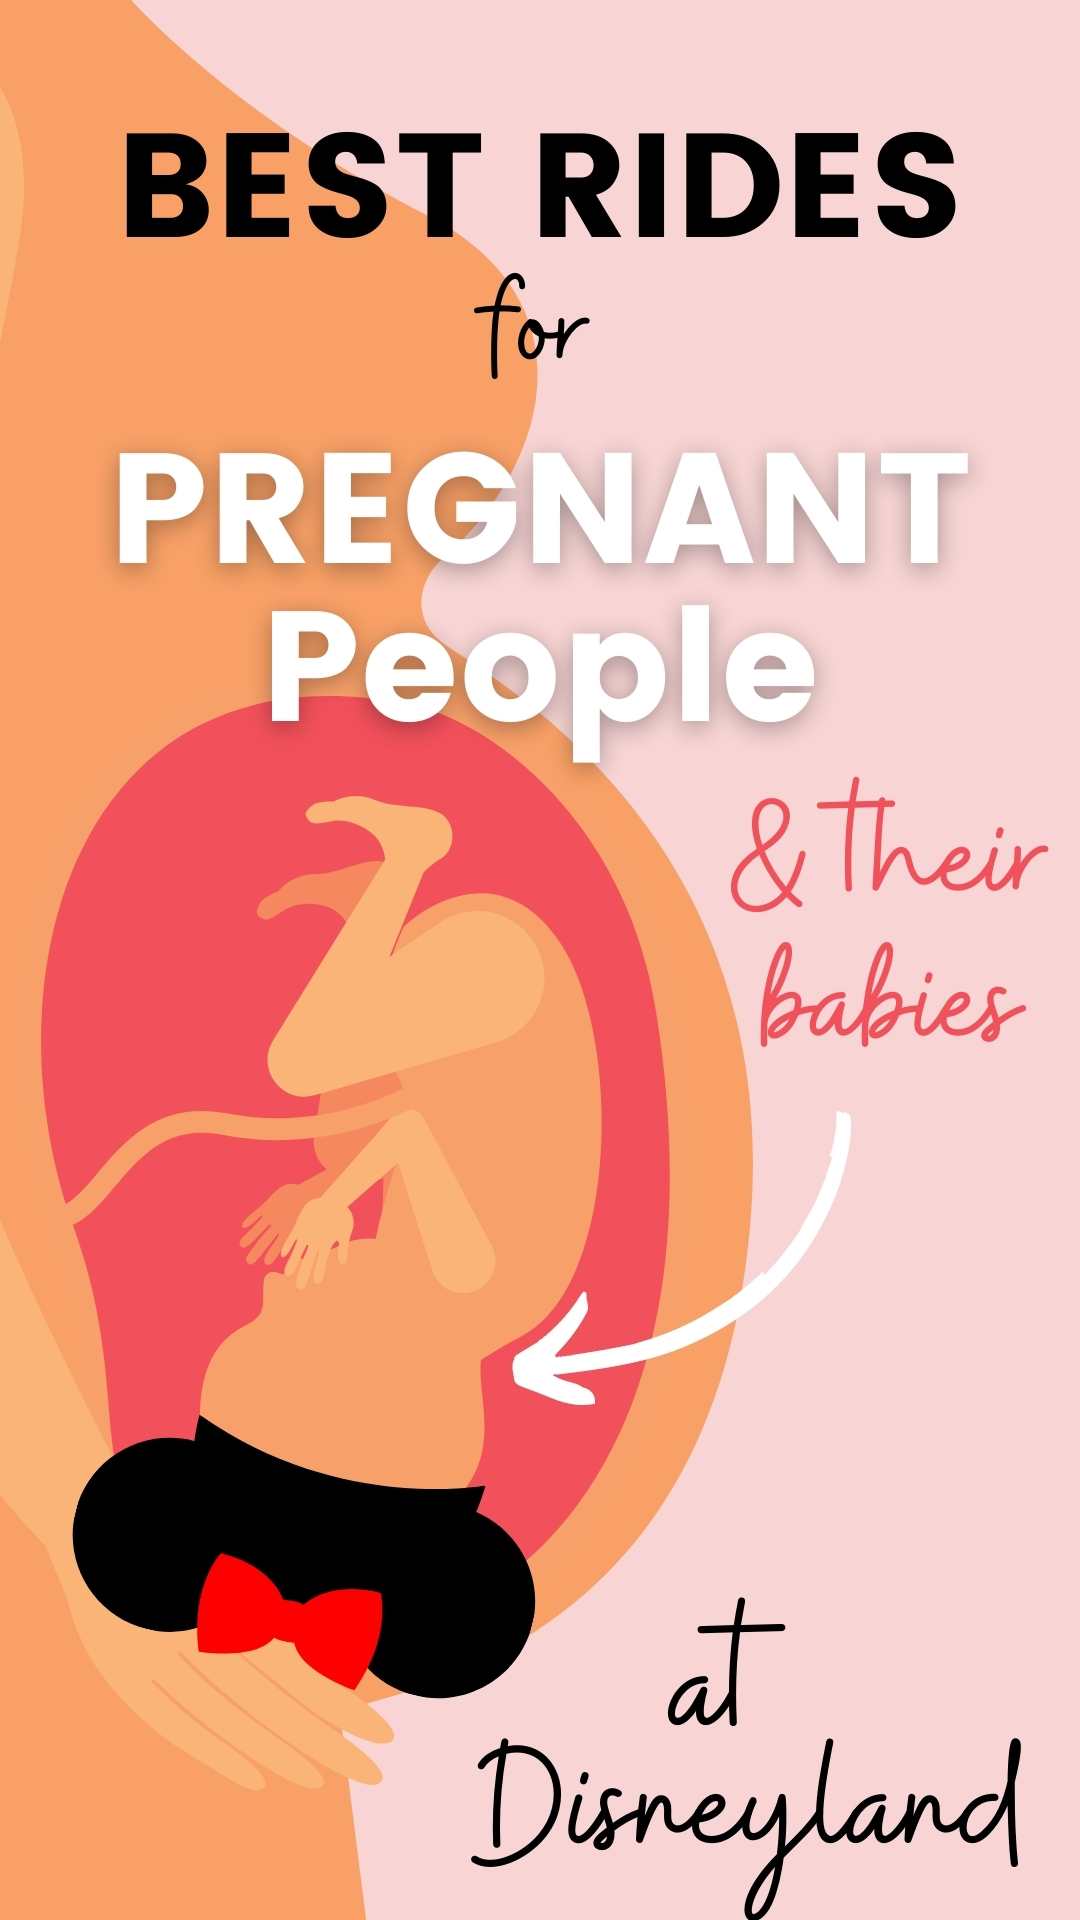 Going to Disneyland as a pregnant person can be confusing. Will they stop you from going on rides? Could rides hurt you or your baby? Let's dive into the TOP rides for pregnant people and what you should keep in mind as you go to a theme park pregnant.